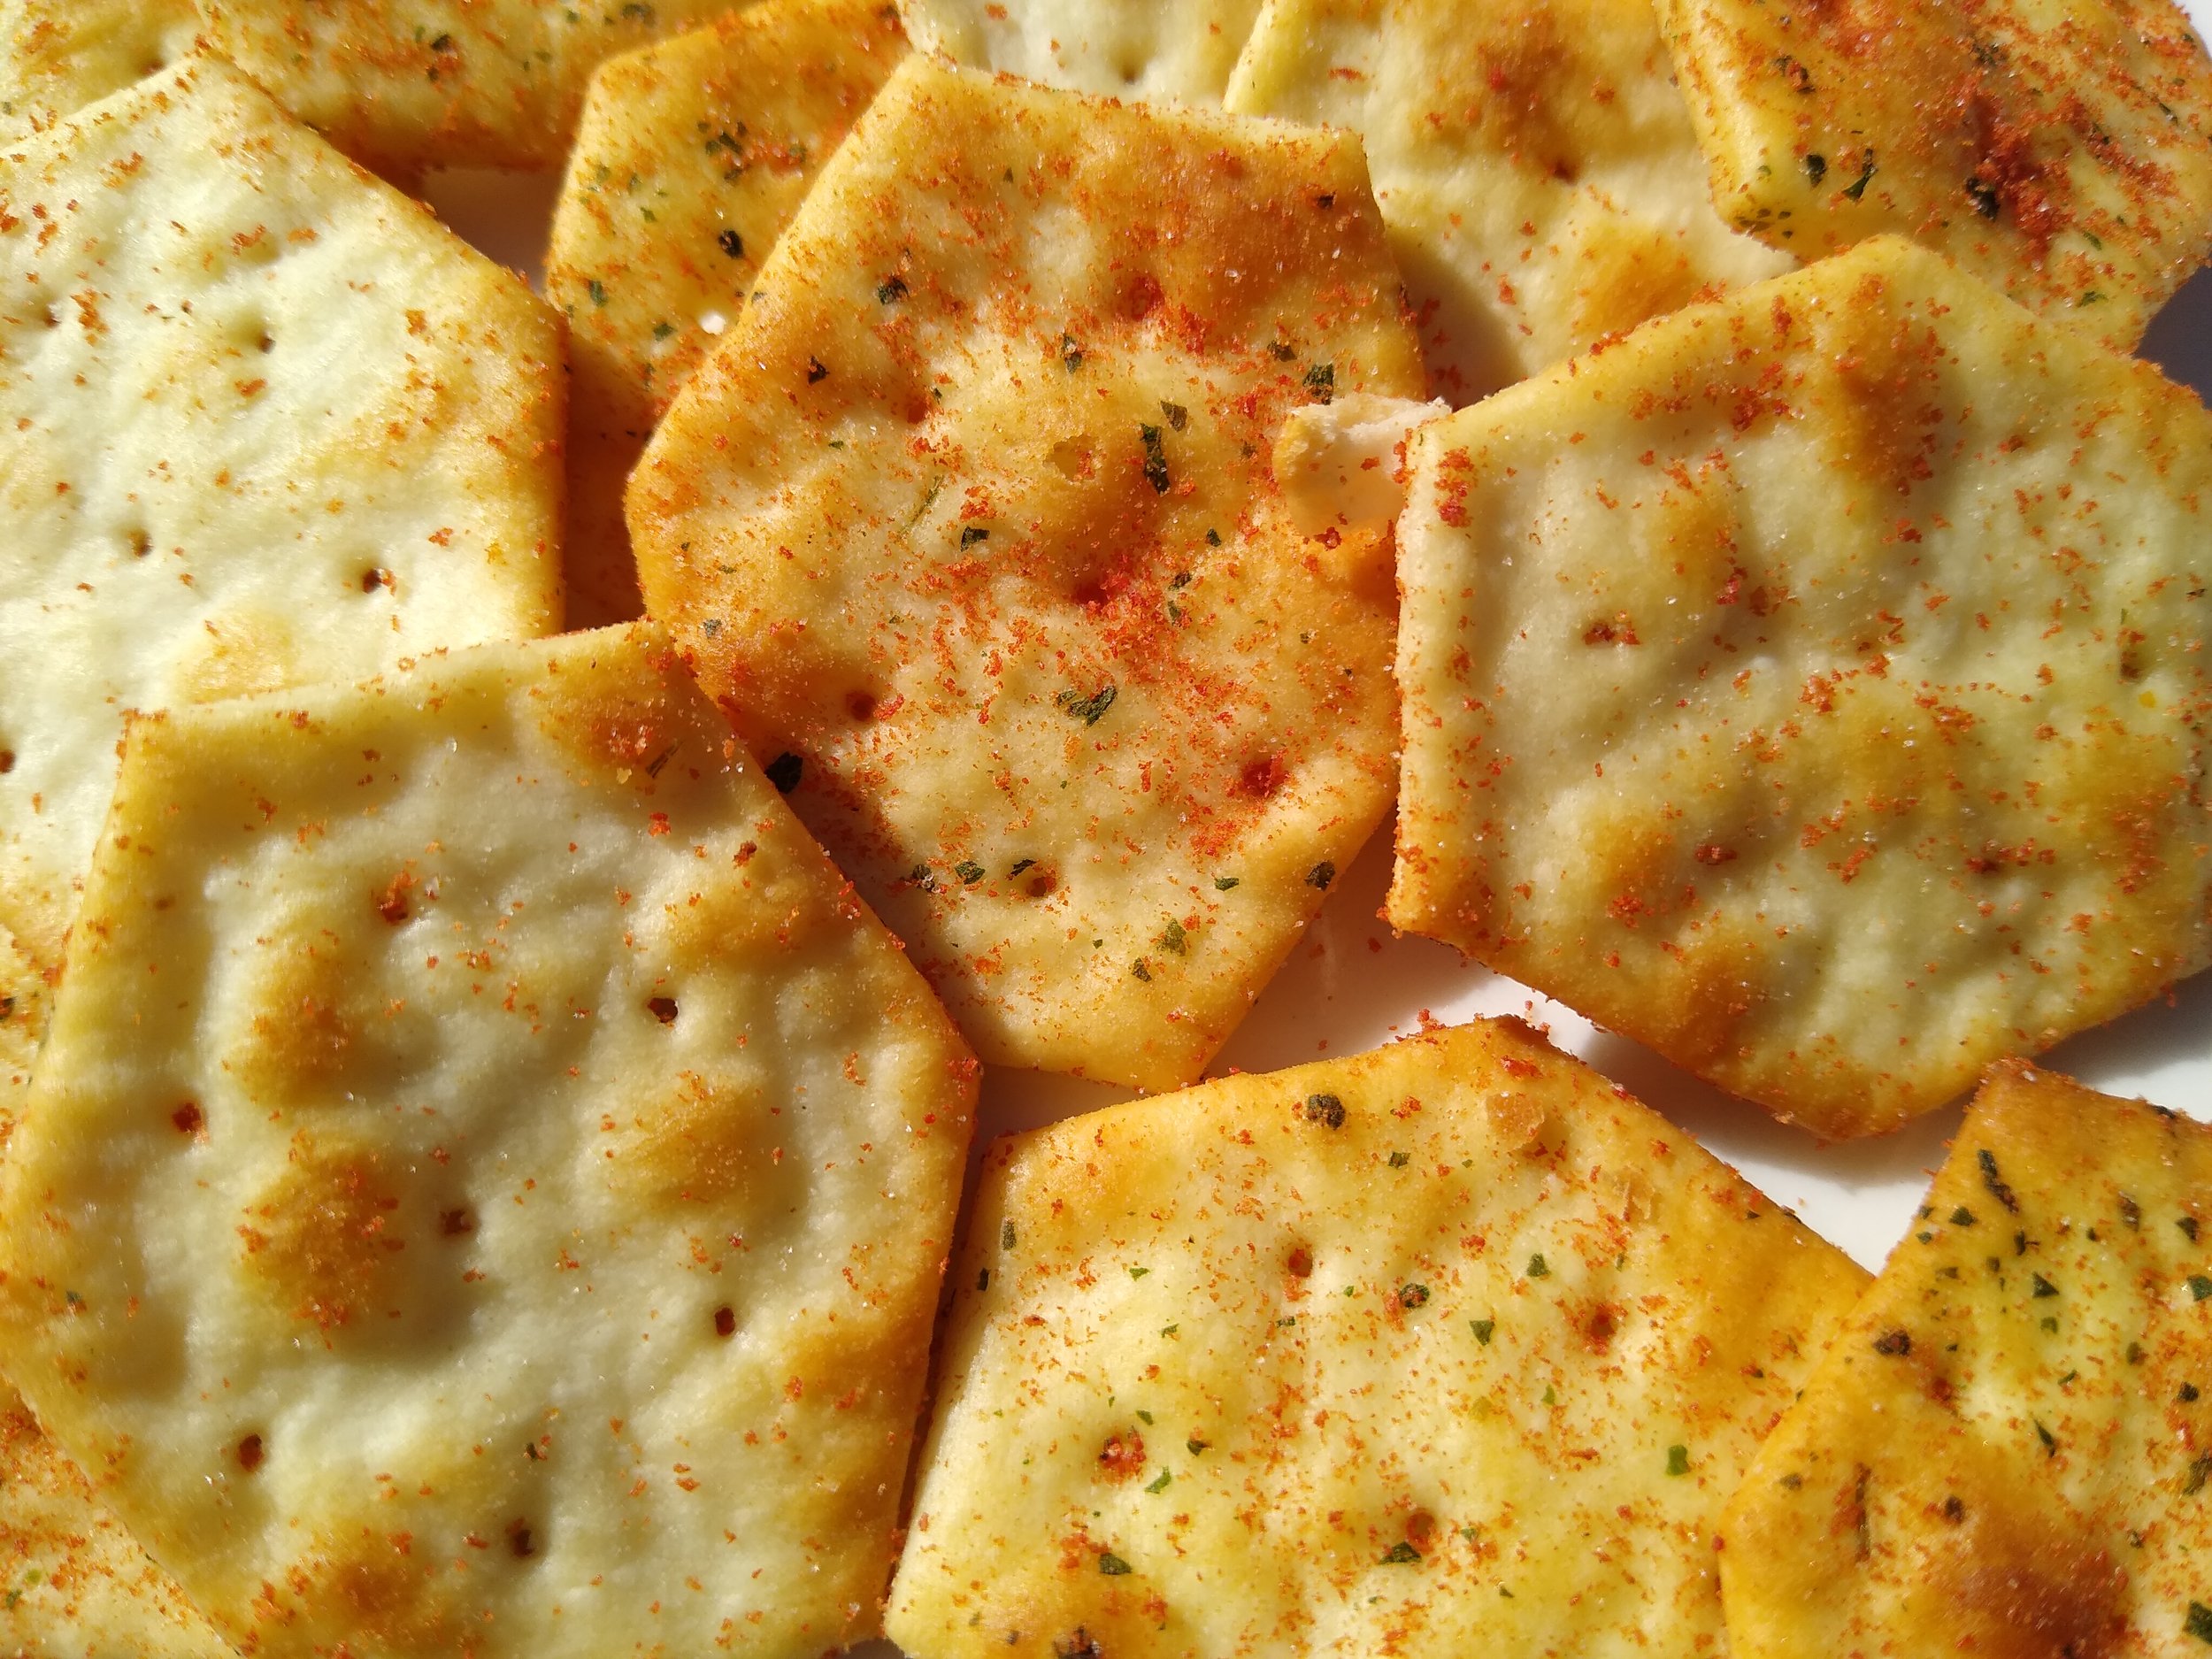 Arnott's_Shapes_(barbecue_flavour).jpg